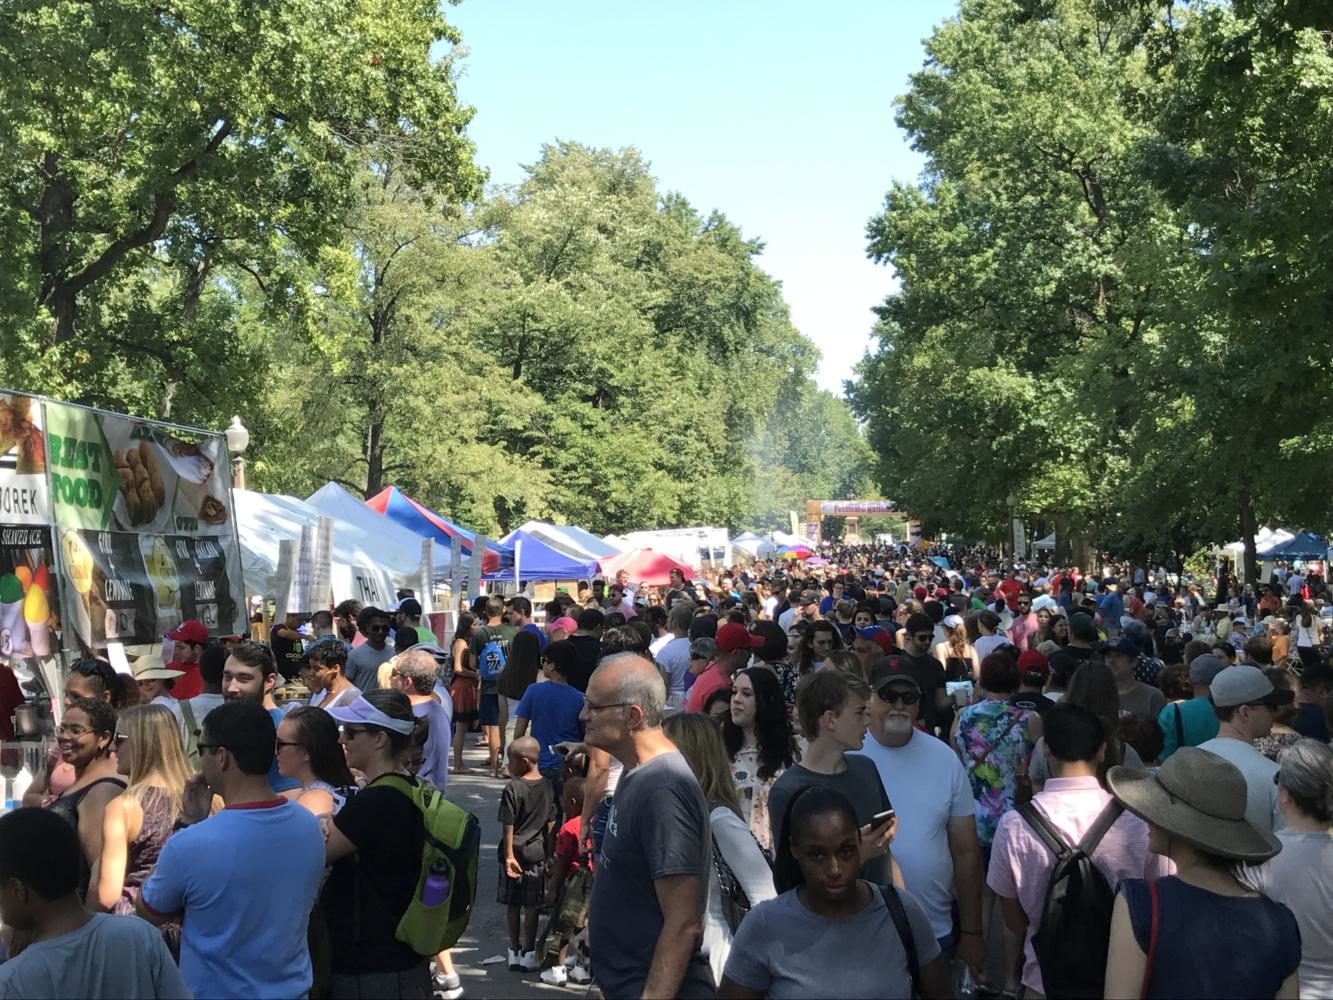 Crowds enjoy the day in Tower Grove Park at Festival of Nations. Photo by Hannah Esker.